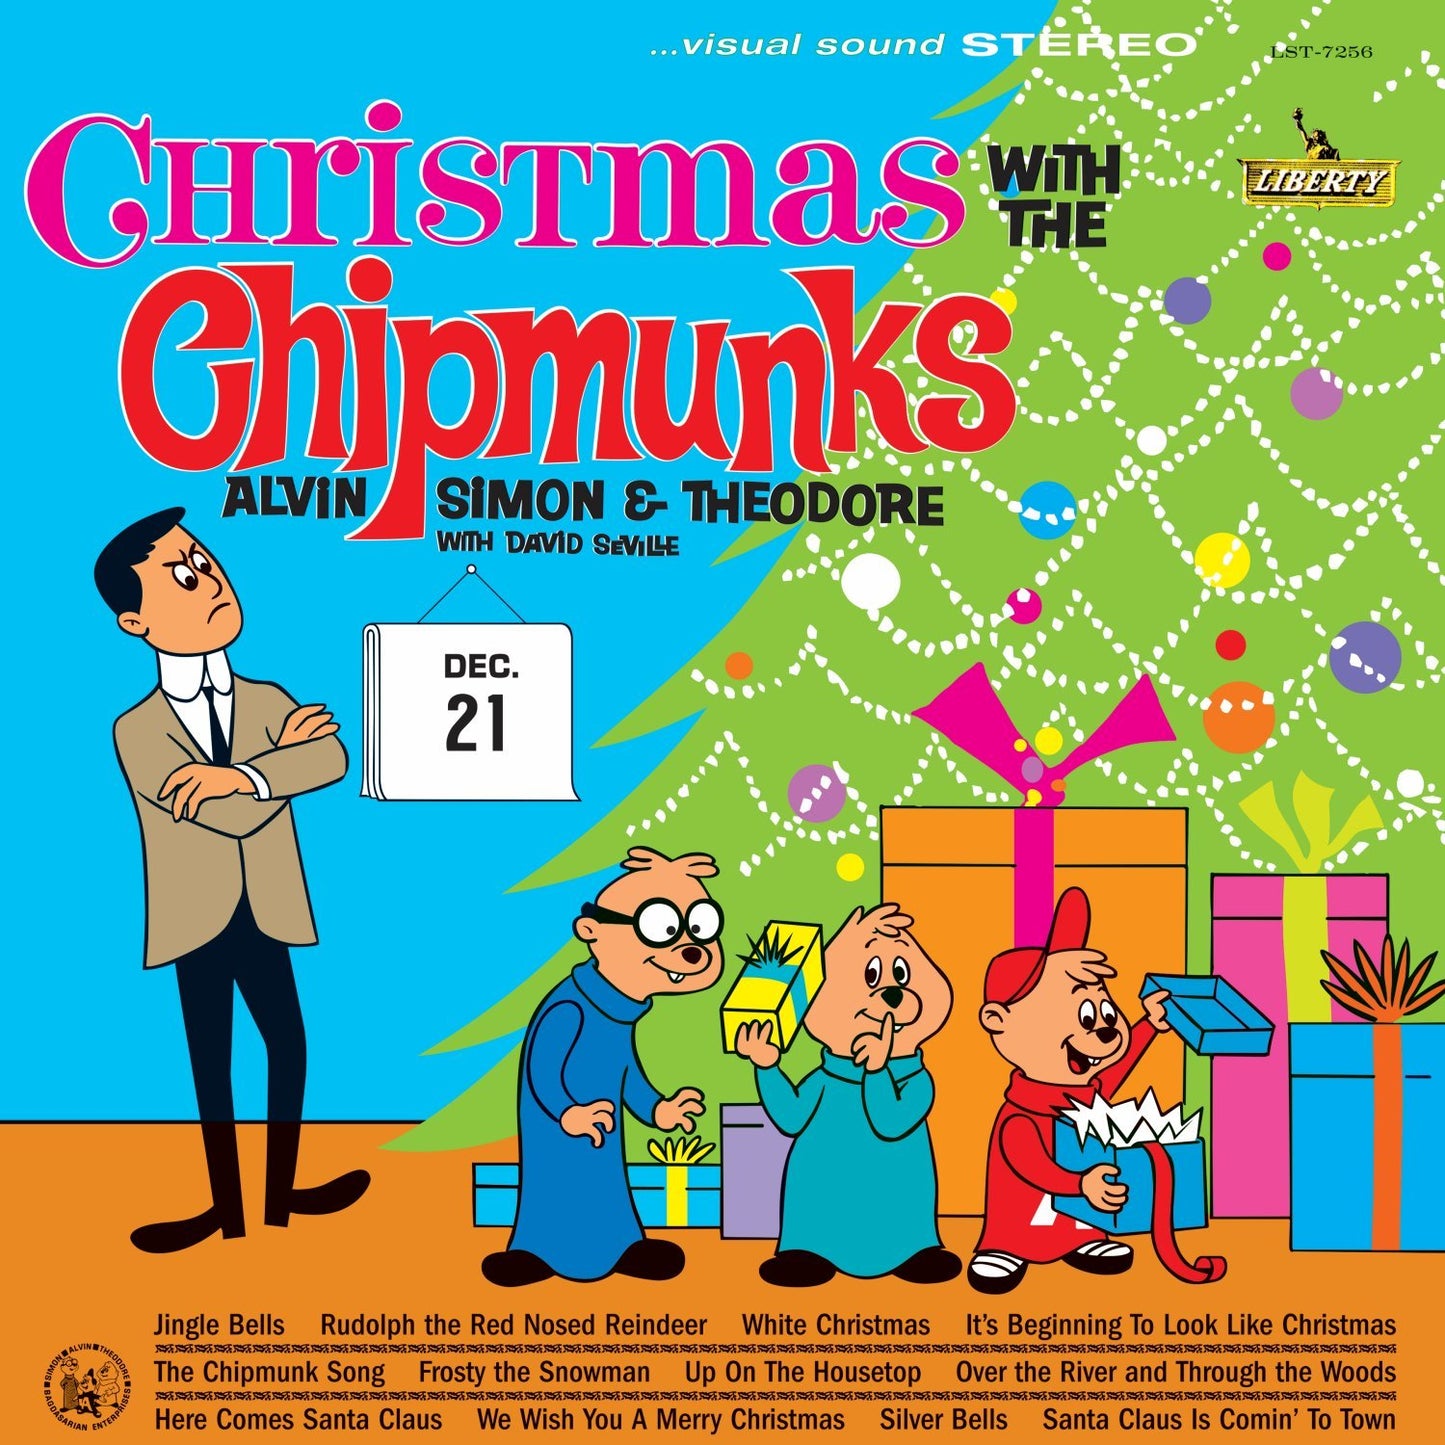 Chipmunks, The/Christmas With [LP]